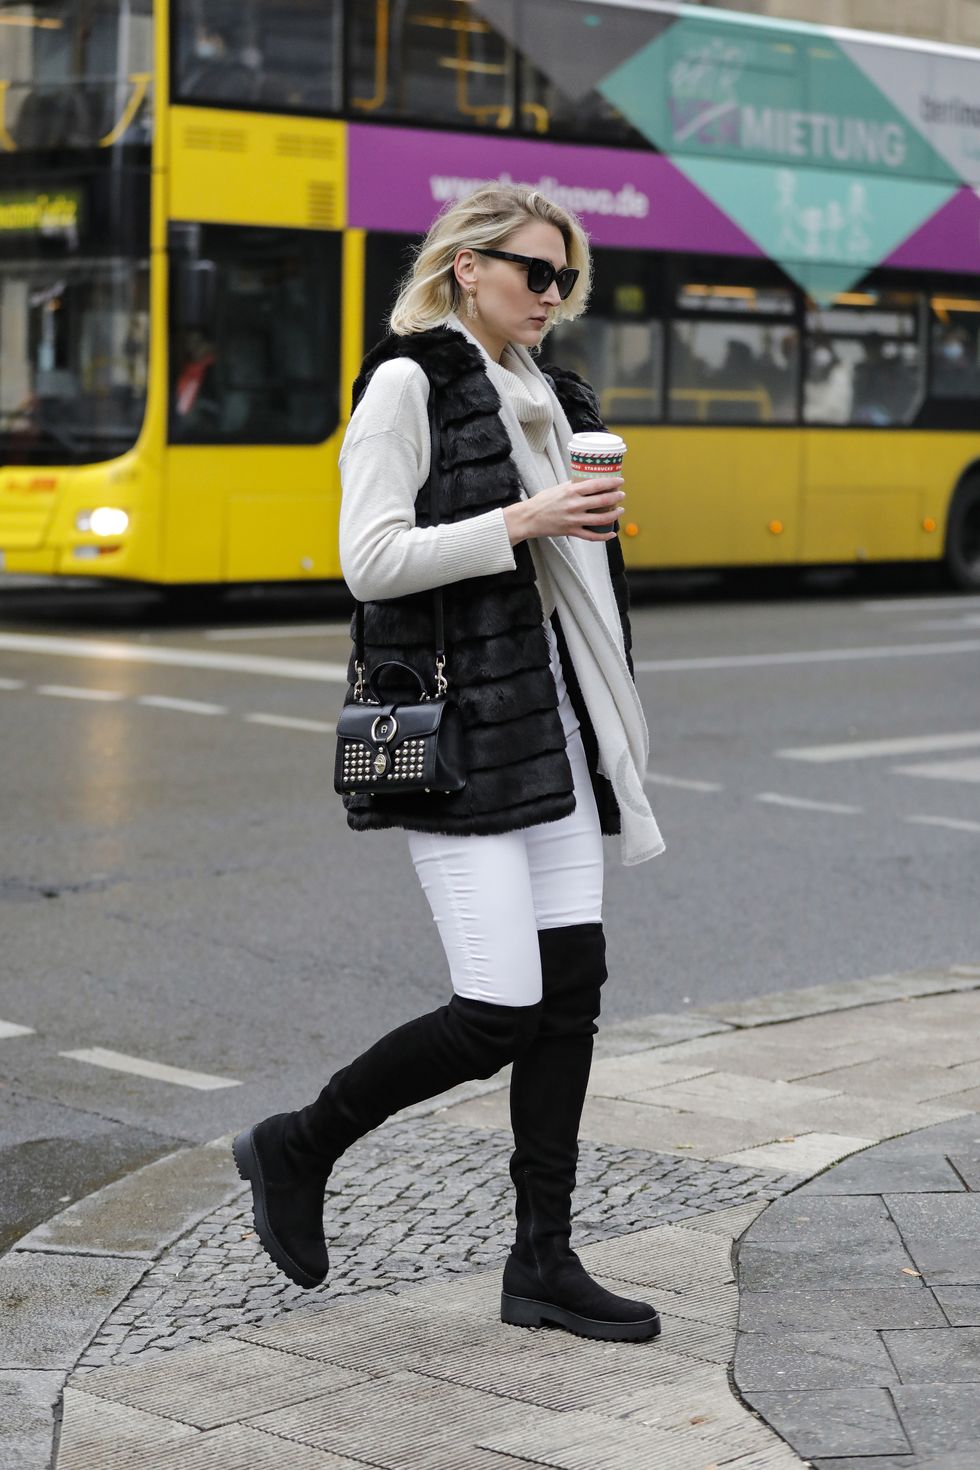 berlin, germany   december 11 german model and actress victoria jancke wearing a black faux fur vest by karl lagerfeld, a beige cashmere scarf by gucci, a cream colored turtleneck pullover by vero moda, a black bag with gold studs by aigner, white pants by top shop, black wide fit platform overknee boots by evenodd, gold earrings by lea y paola and black sunglasses by pilgrim during a street style shooting on december 11, 2020 in berlin, germany photo by streetstyleshootersgetty images